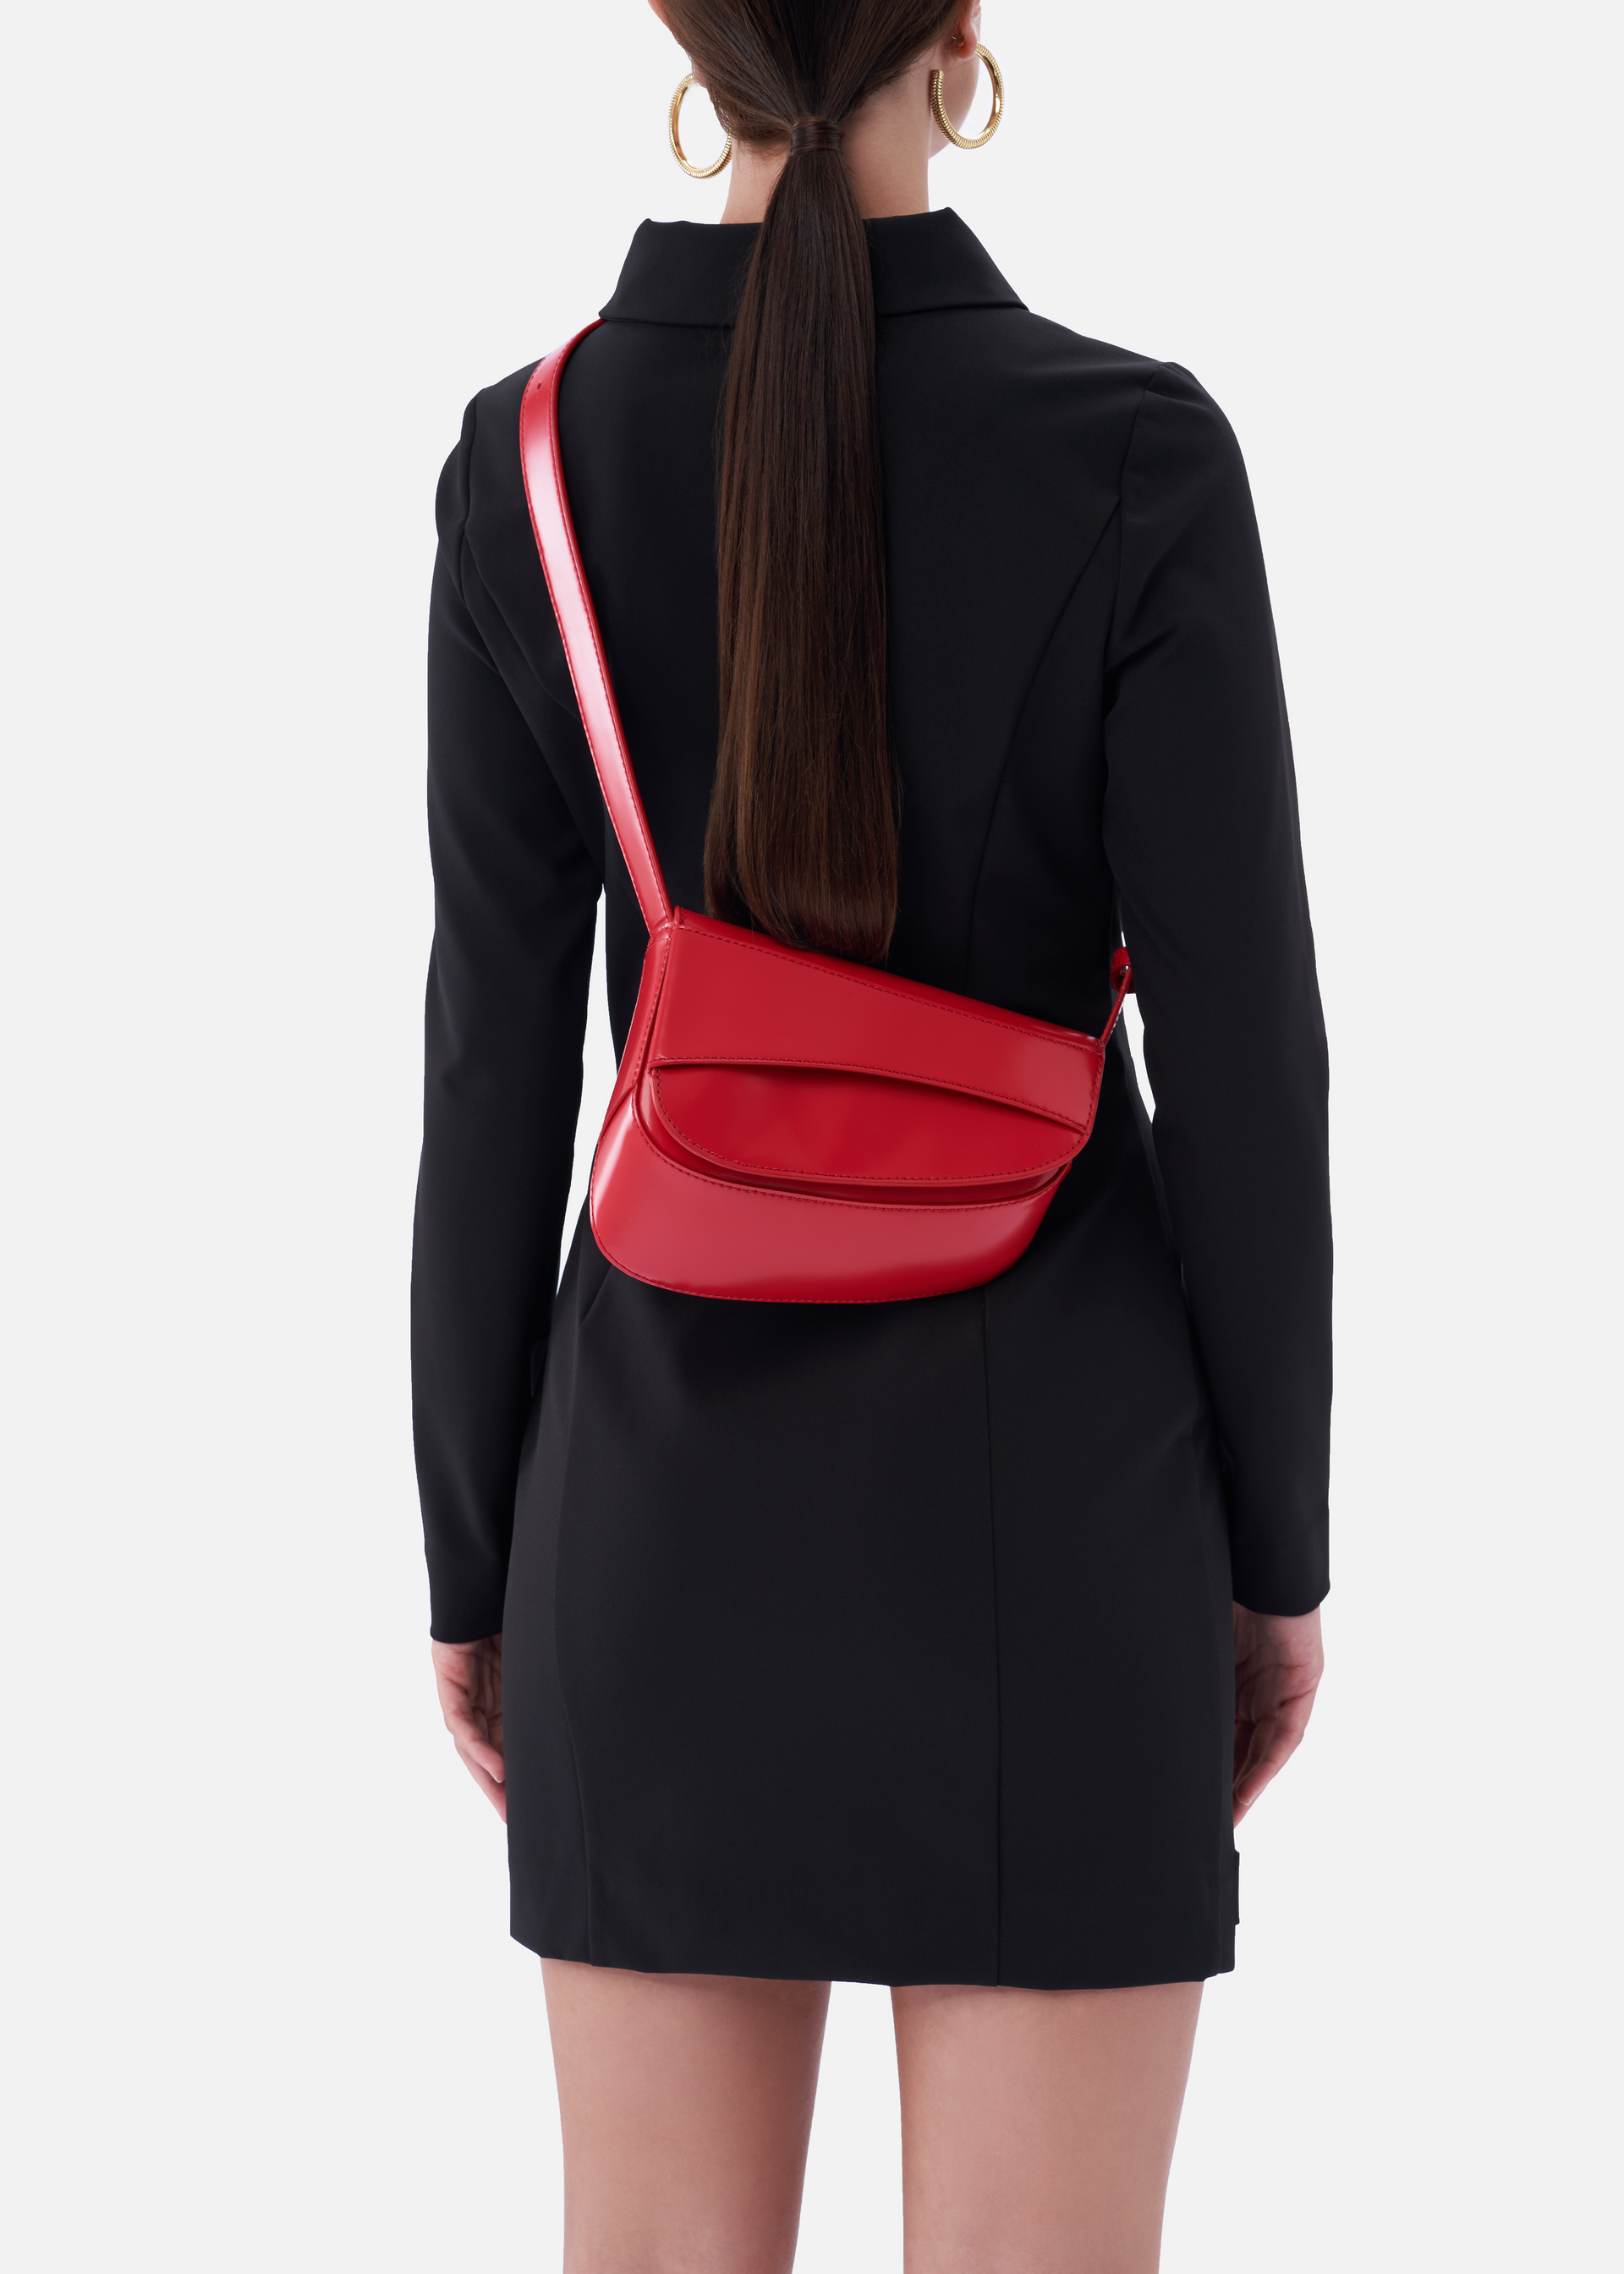 Marianne small patent leather shoulder bag in red - ro bags